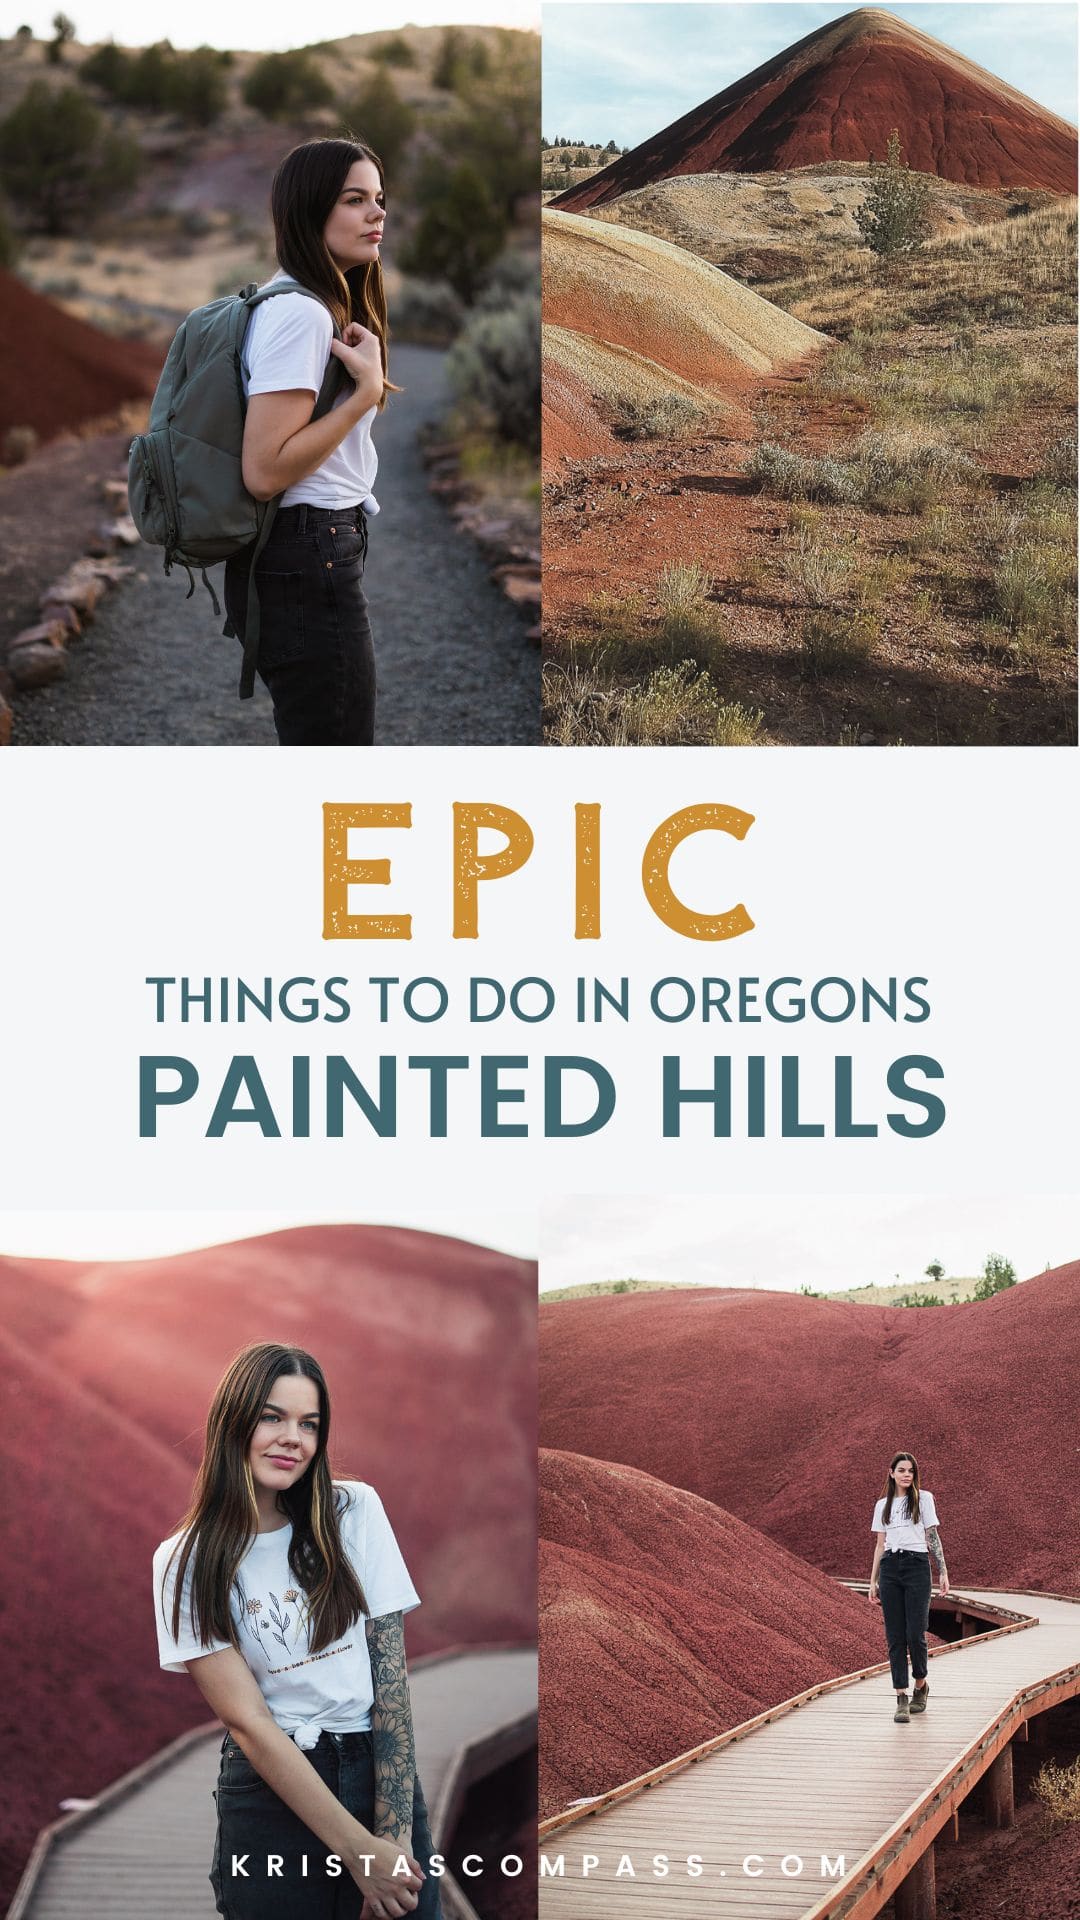 epic things to do in painted hills oregon - the best hikes in oregons painted hills